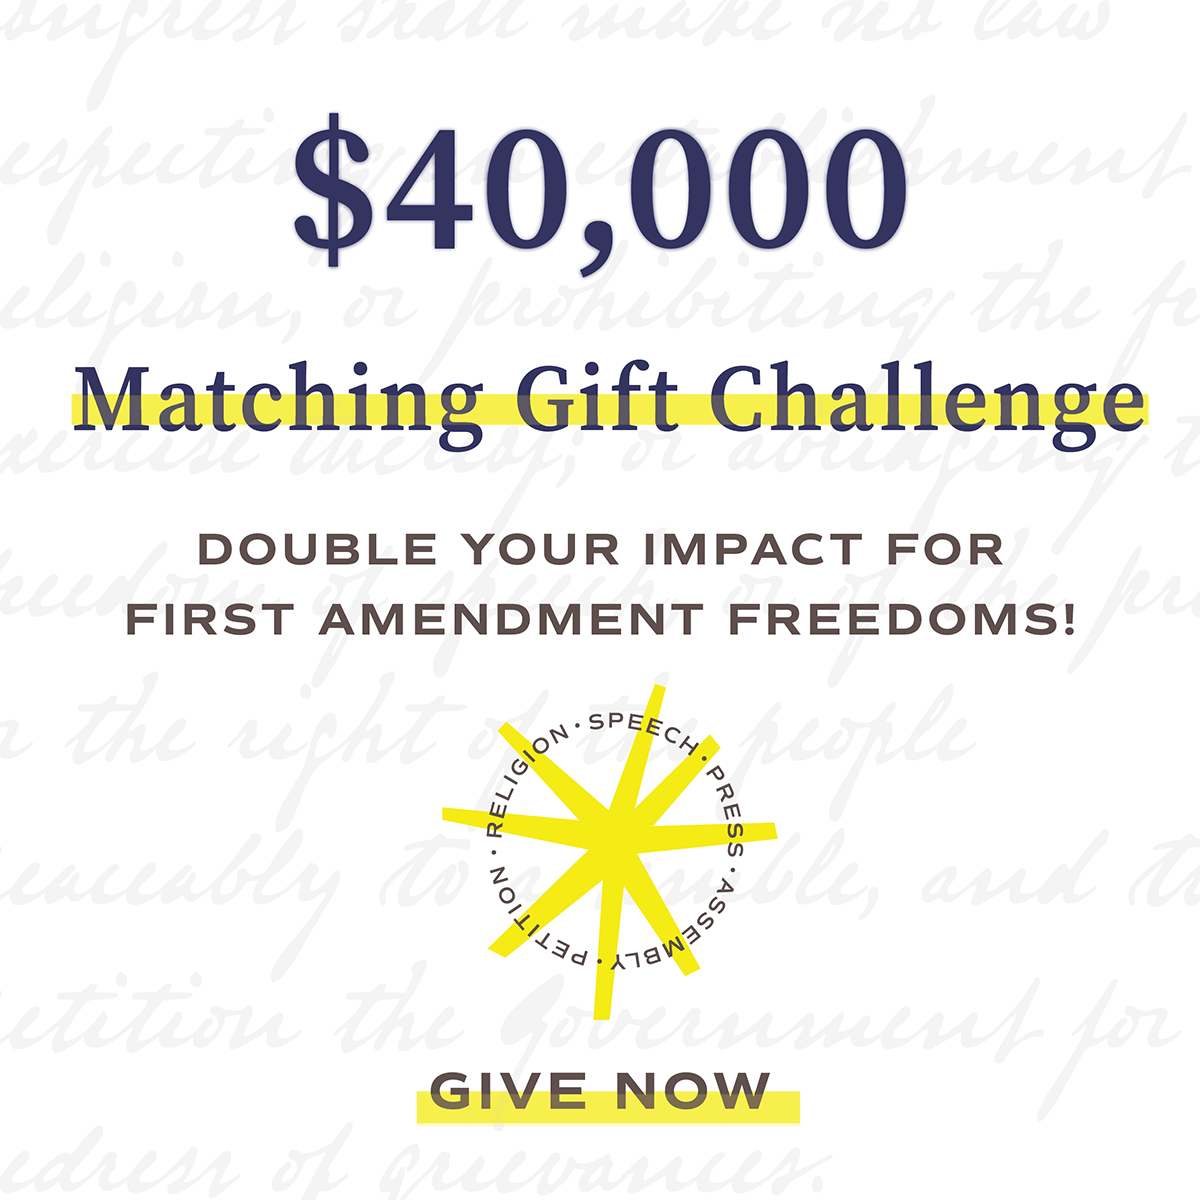 Year-end Giving Match